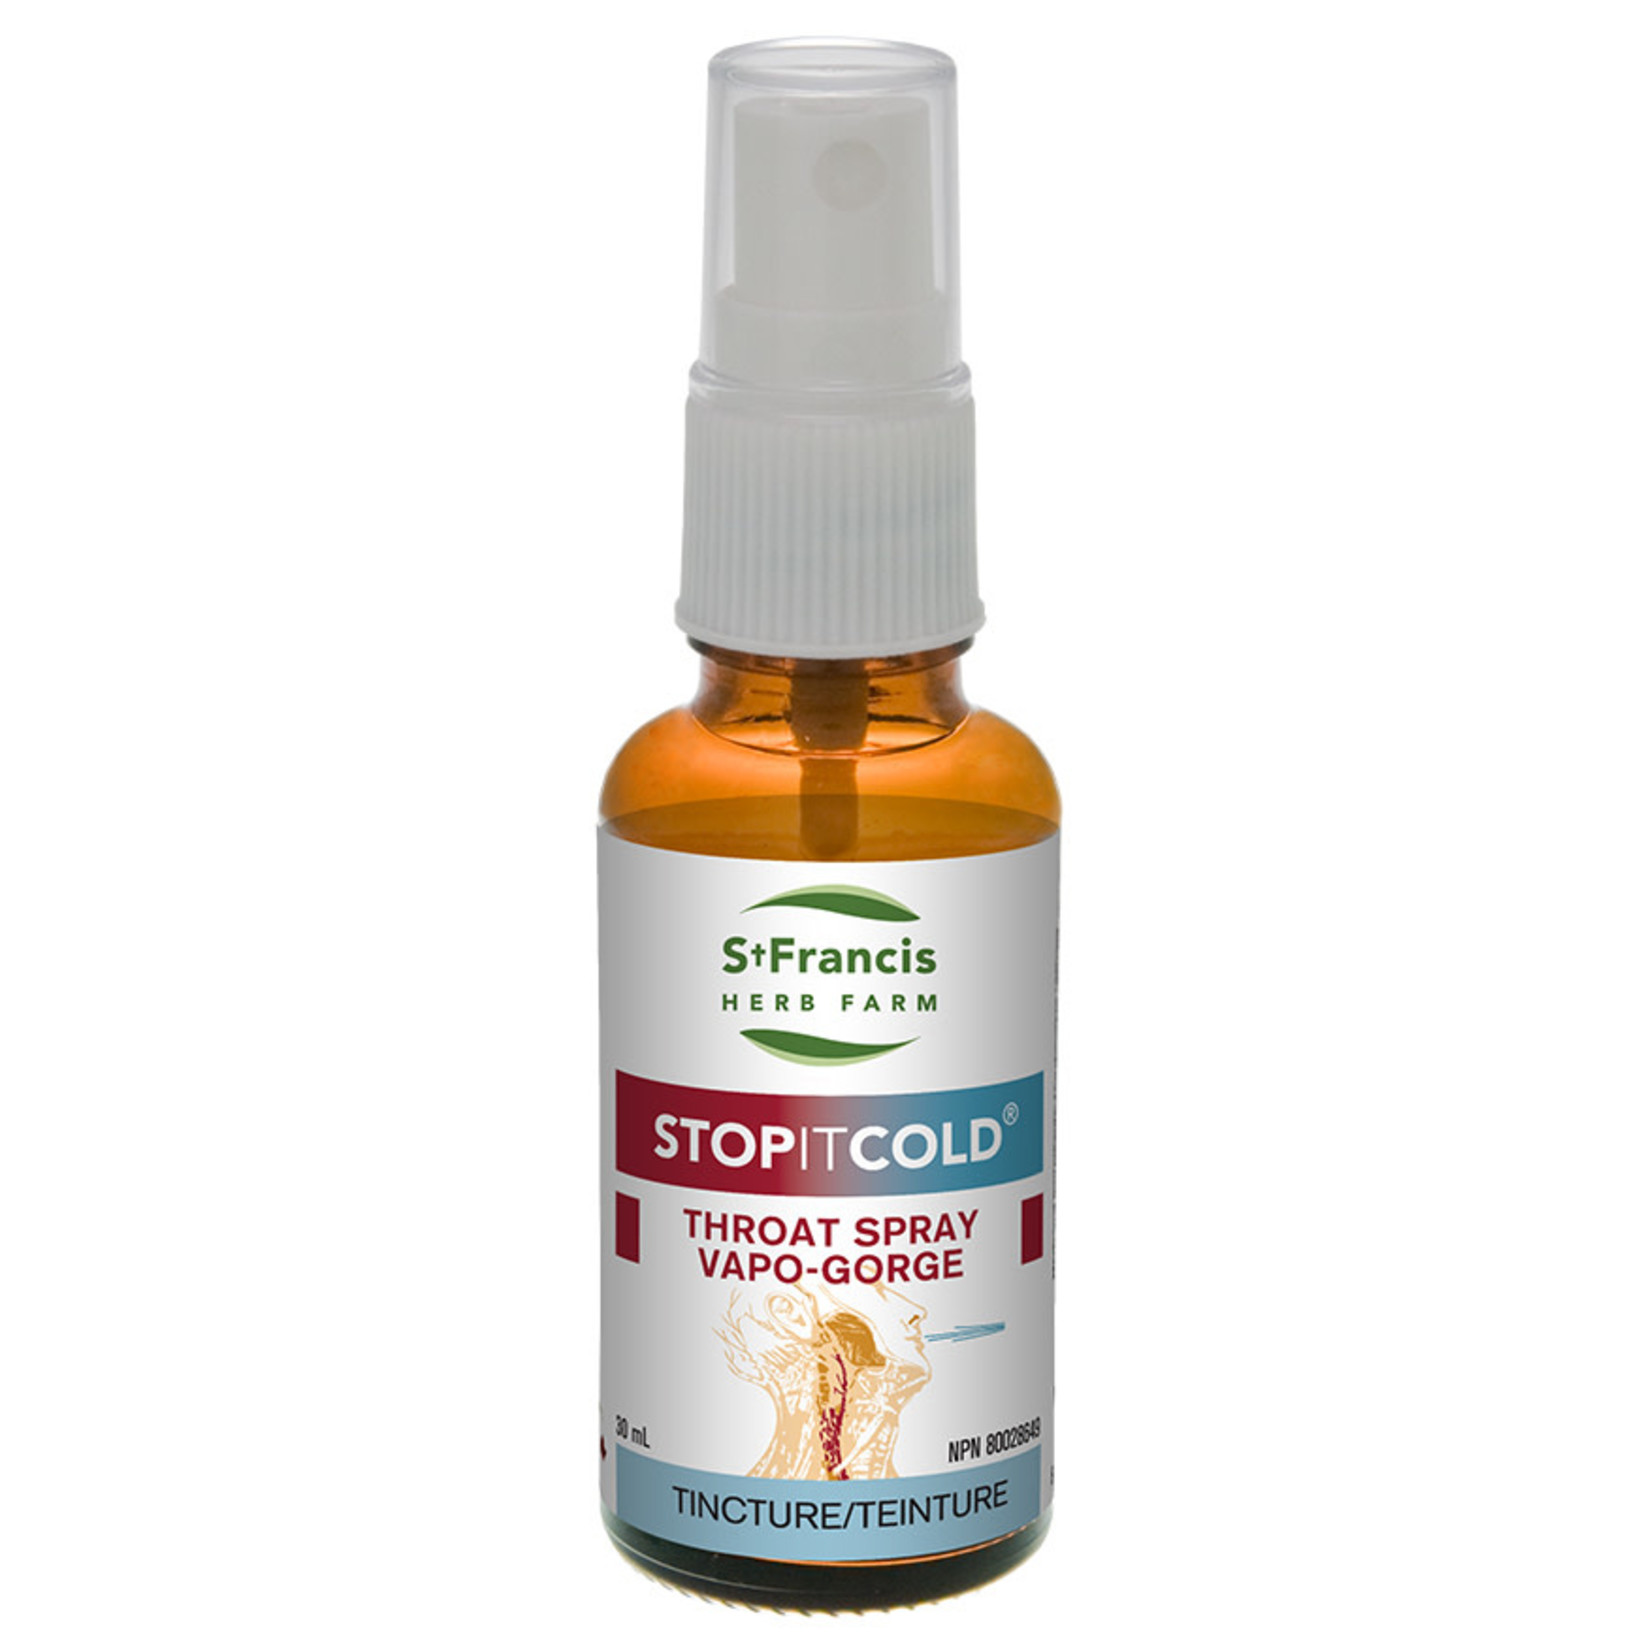 ST FRANCIS ST FRANCIS STOP IT COLD THROAT SPRAY 30ML